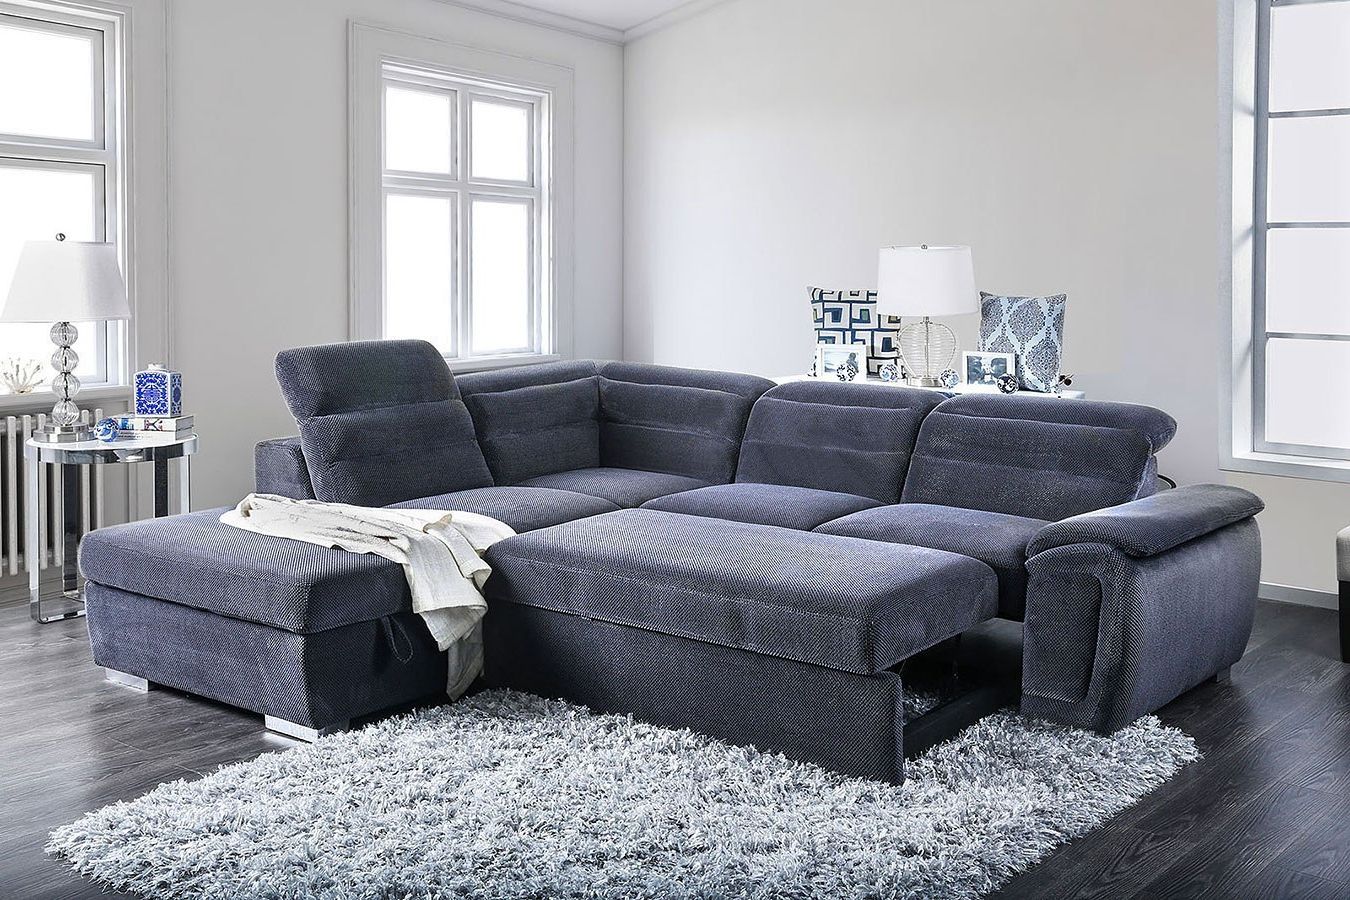 Felicity Sectional W/ Pull Out Sleeper (dark Gray)furniture Of Intended For Preferred 3 In 1 Gray Pull Out Sleeper Sofas (View 5 of 15)